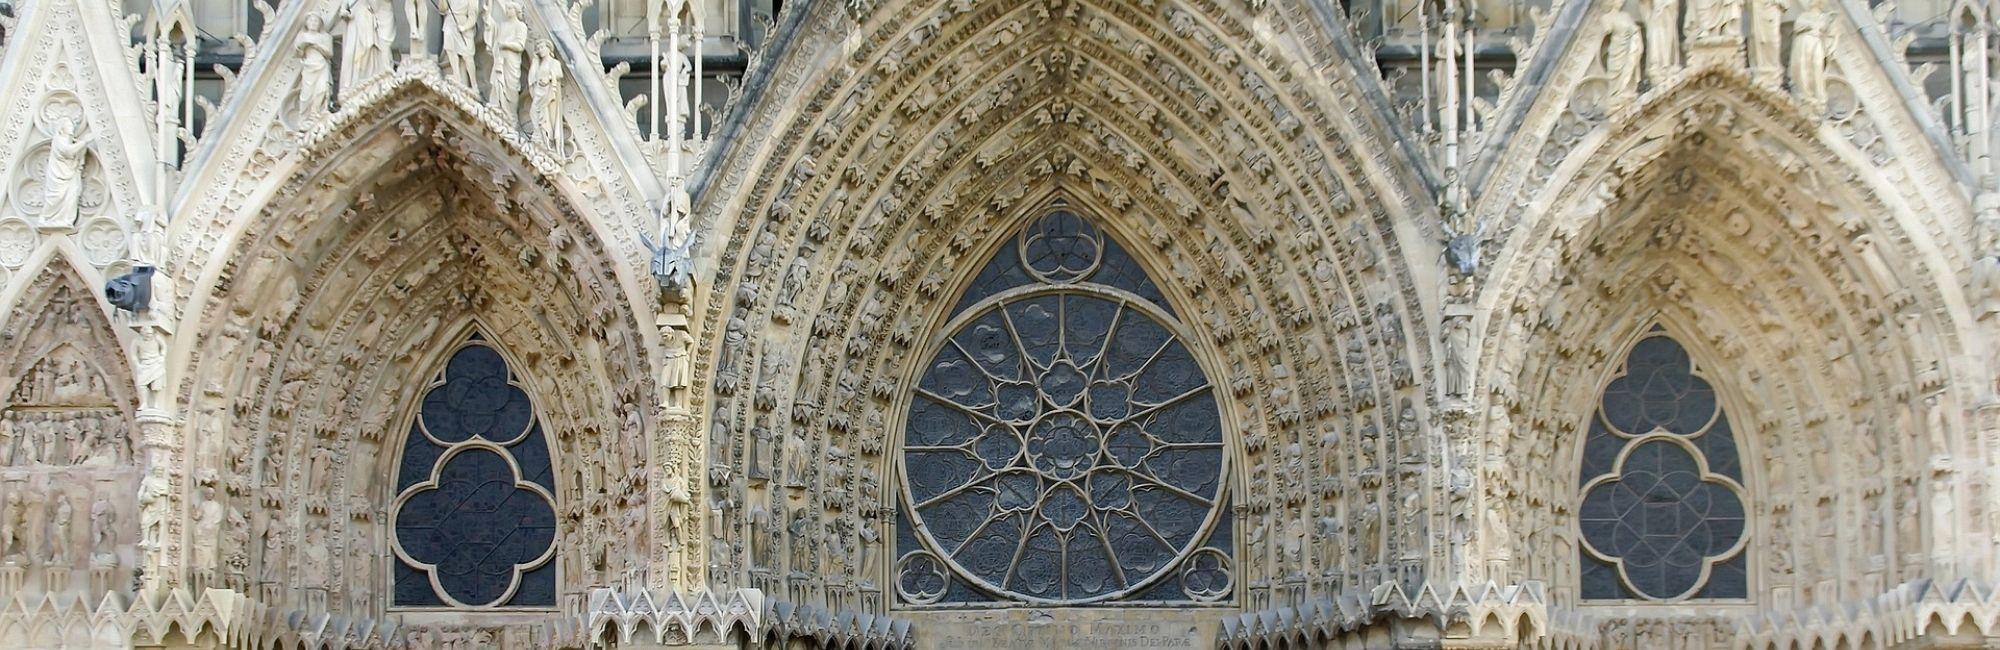 Reims Cathedral Pixabay